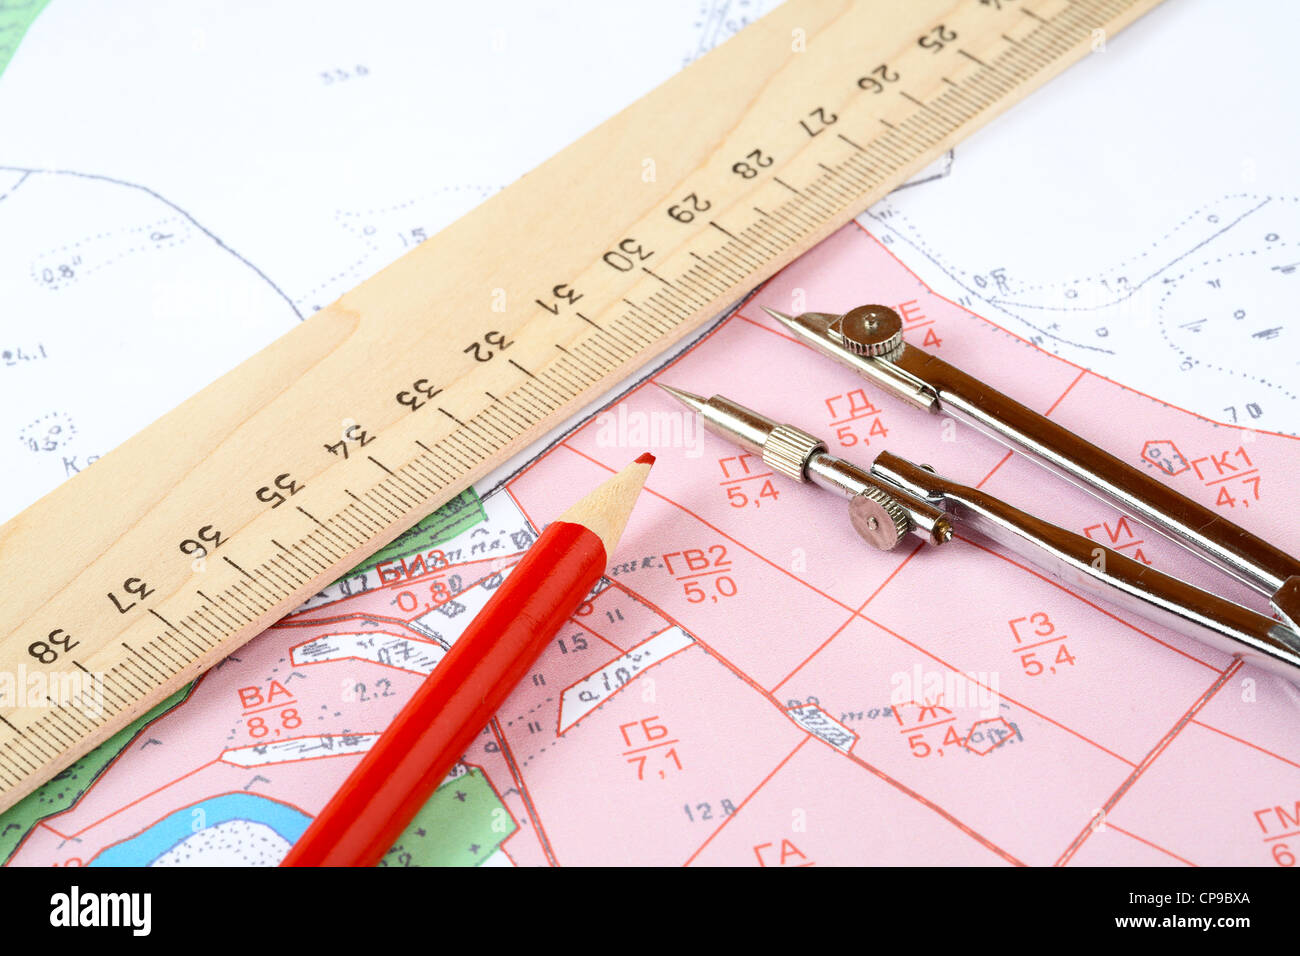 Red pencil compasses and ruler on a topographic map Stock Photo